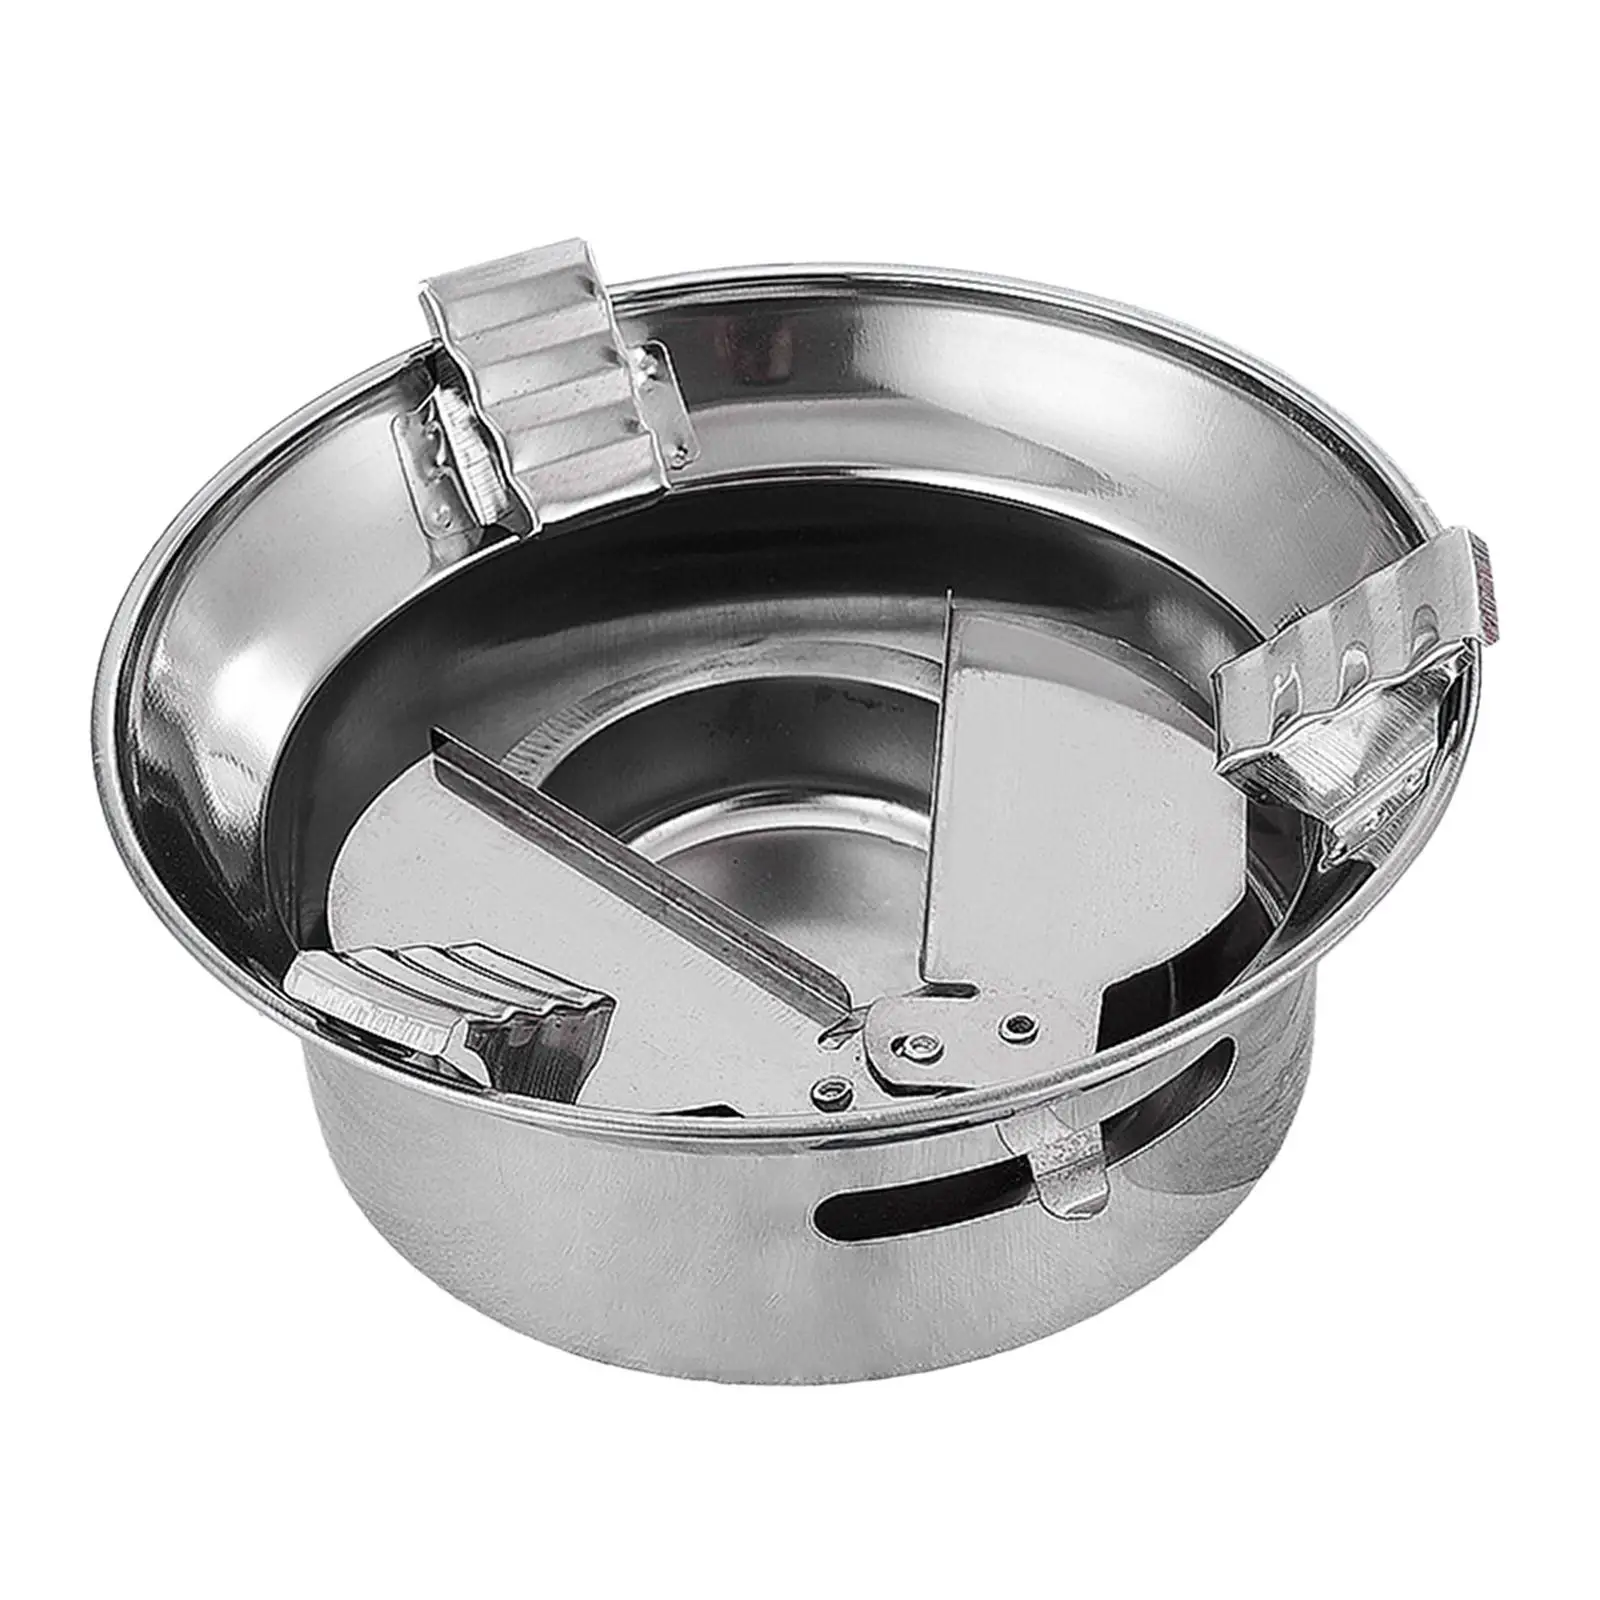 Outdoor Alcohol Stove Stainless Steel for Hiking Fishing Picnic Lightweight